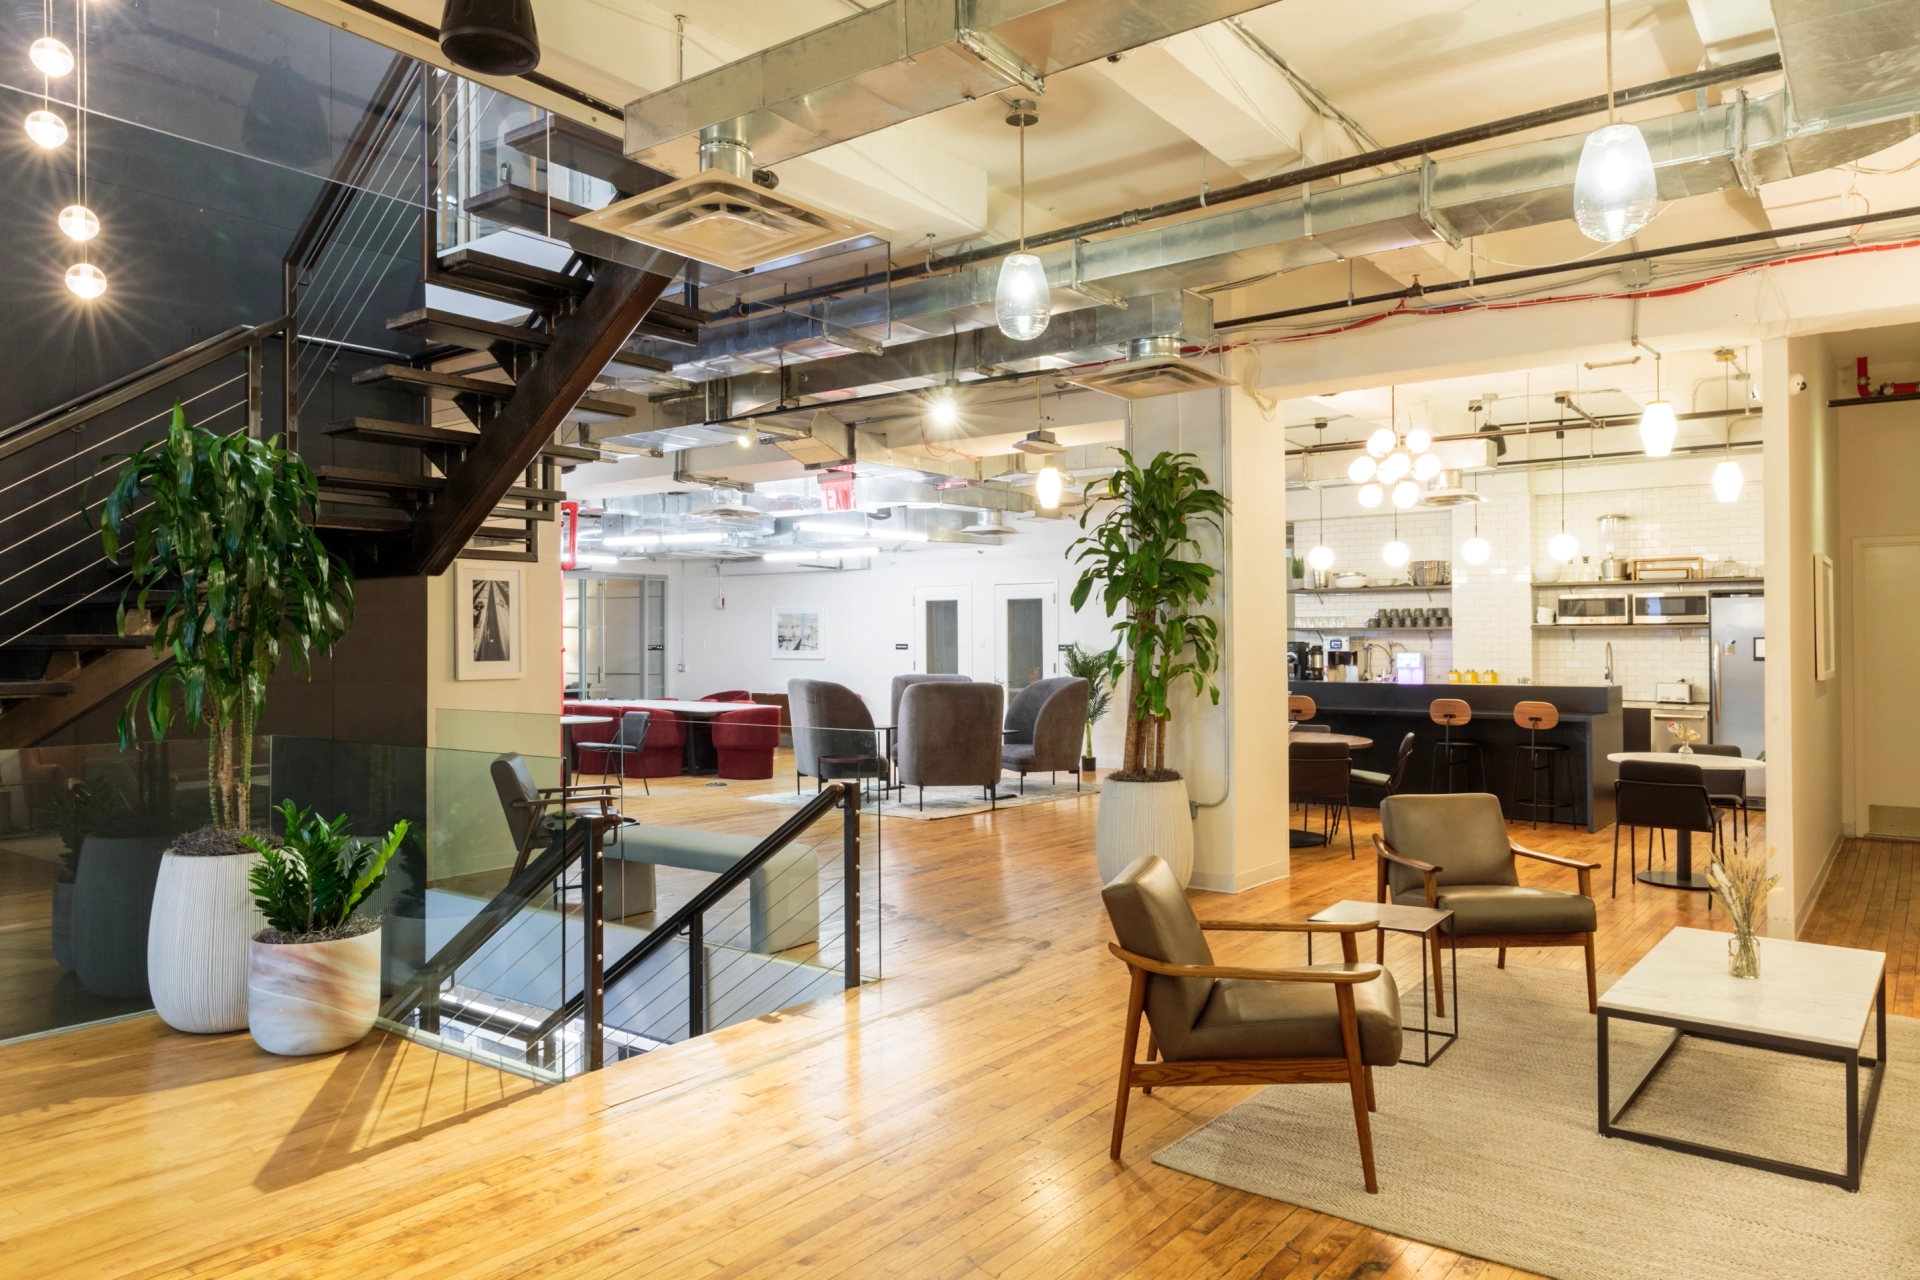 A coworking office in New York with a modern design, featuring a staircase and wooden floors.